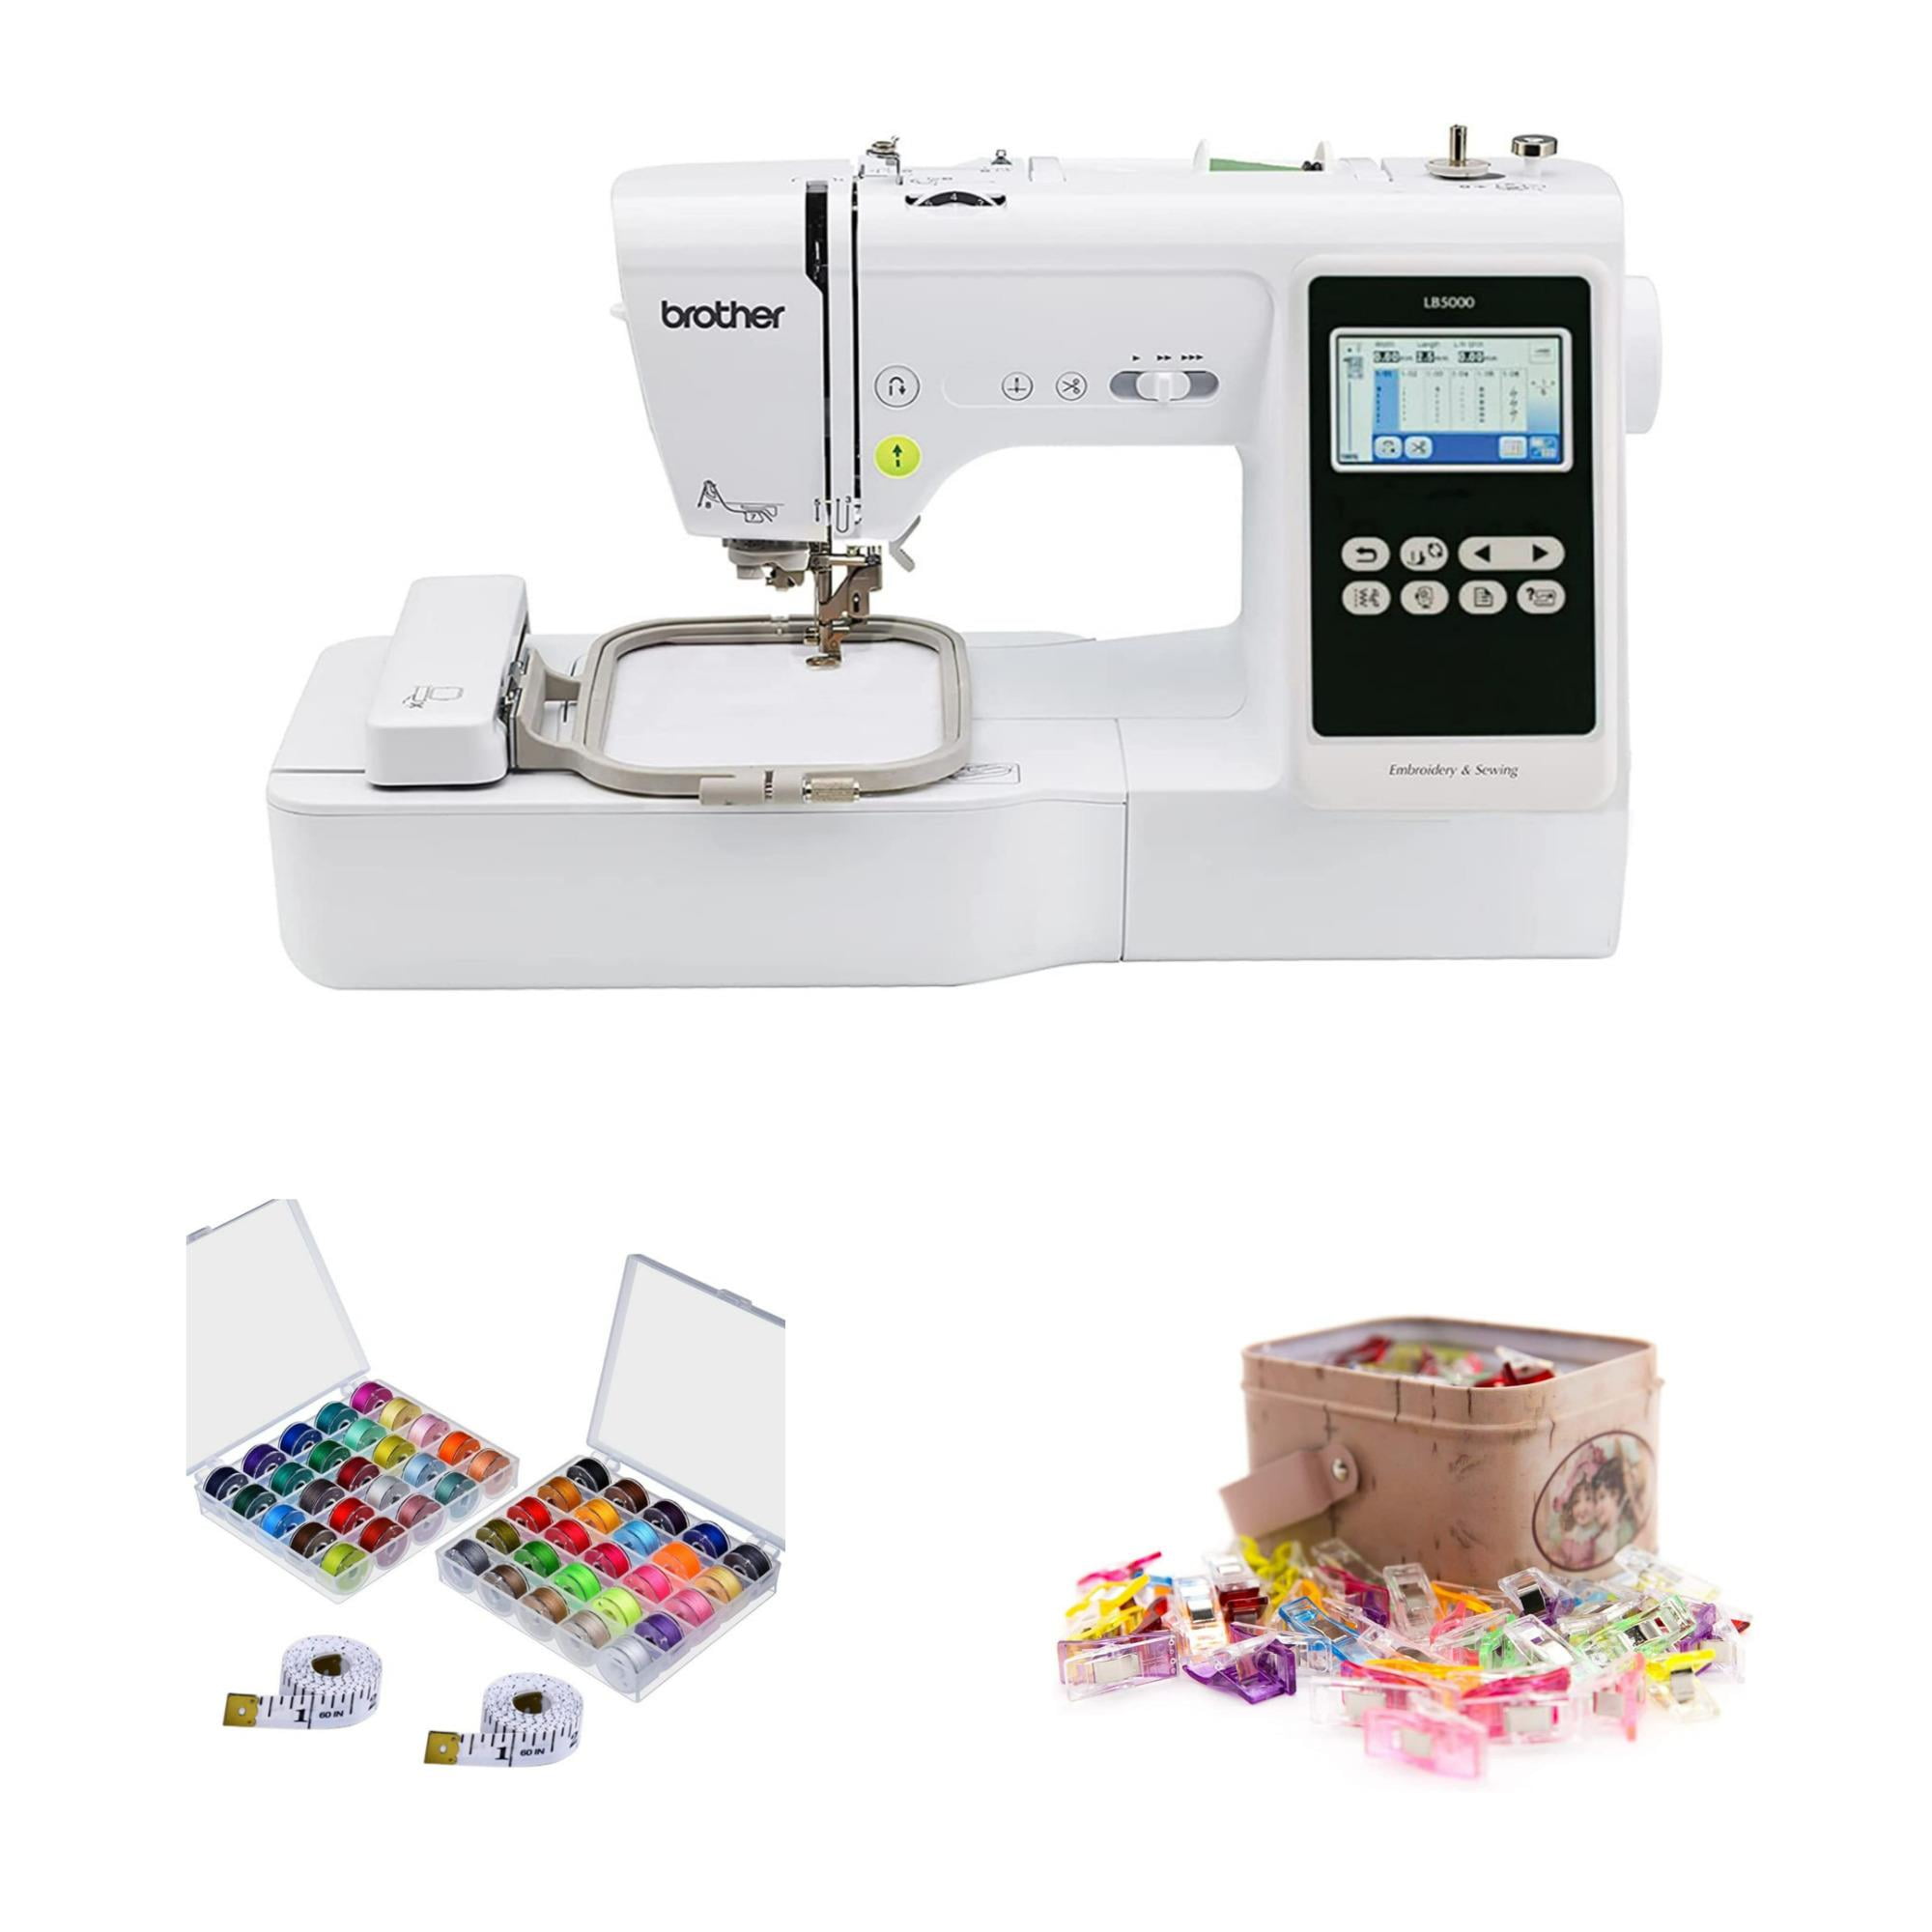 Brother RLB5000 Sewing & Embroidery Machine + 6-Month Limited